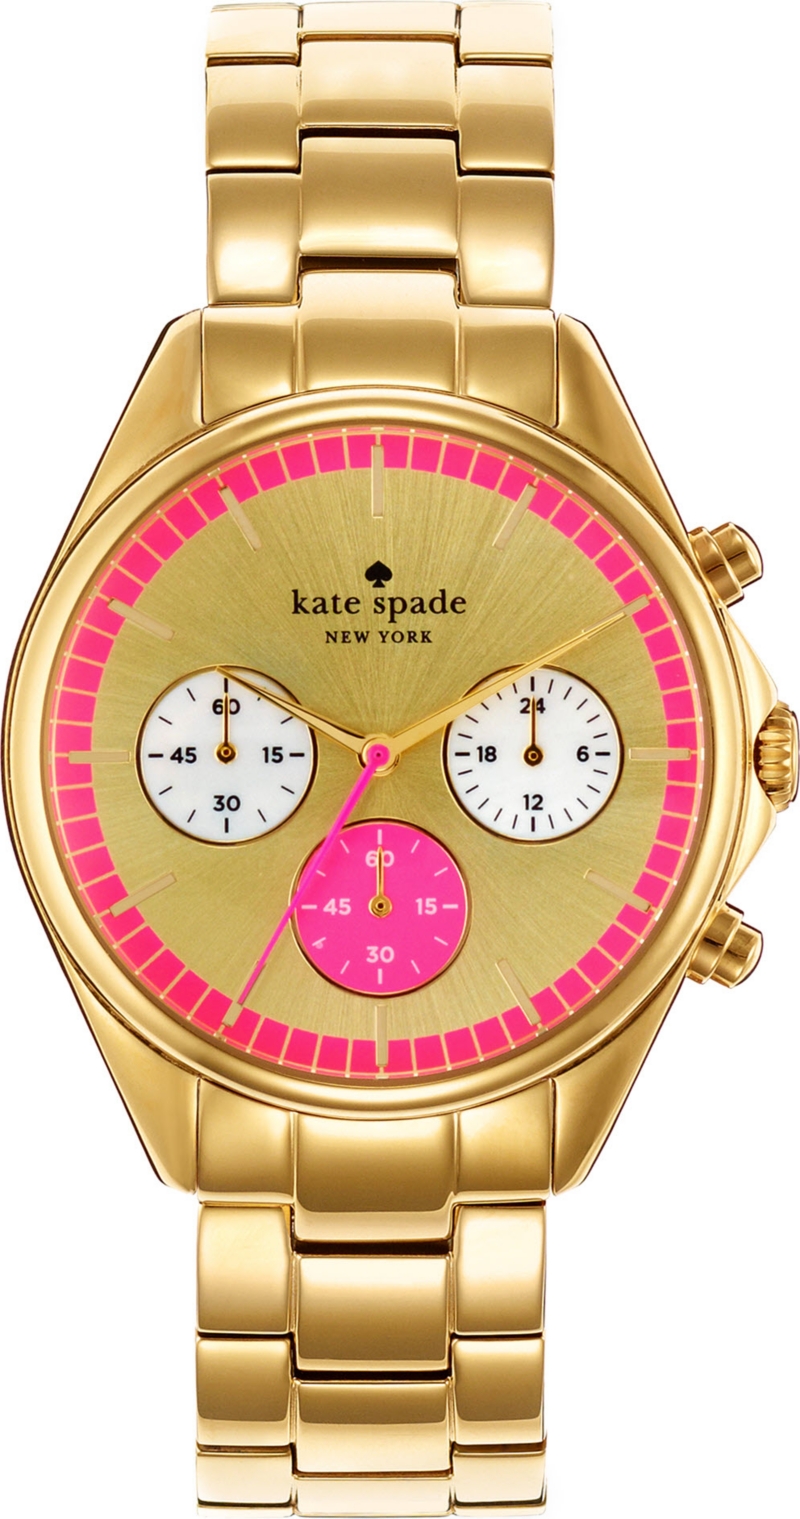 KATE SPADE   Seaport gold plated chronograph watch